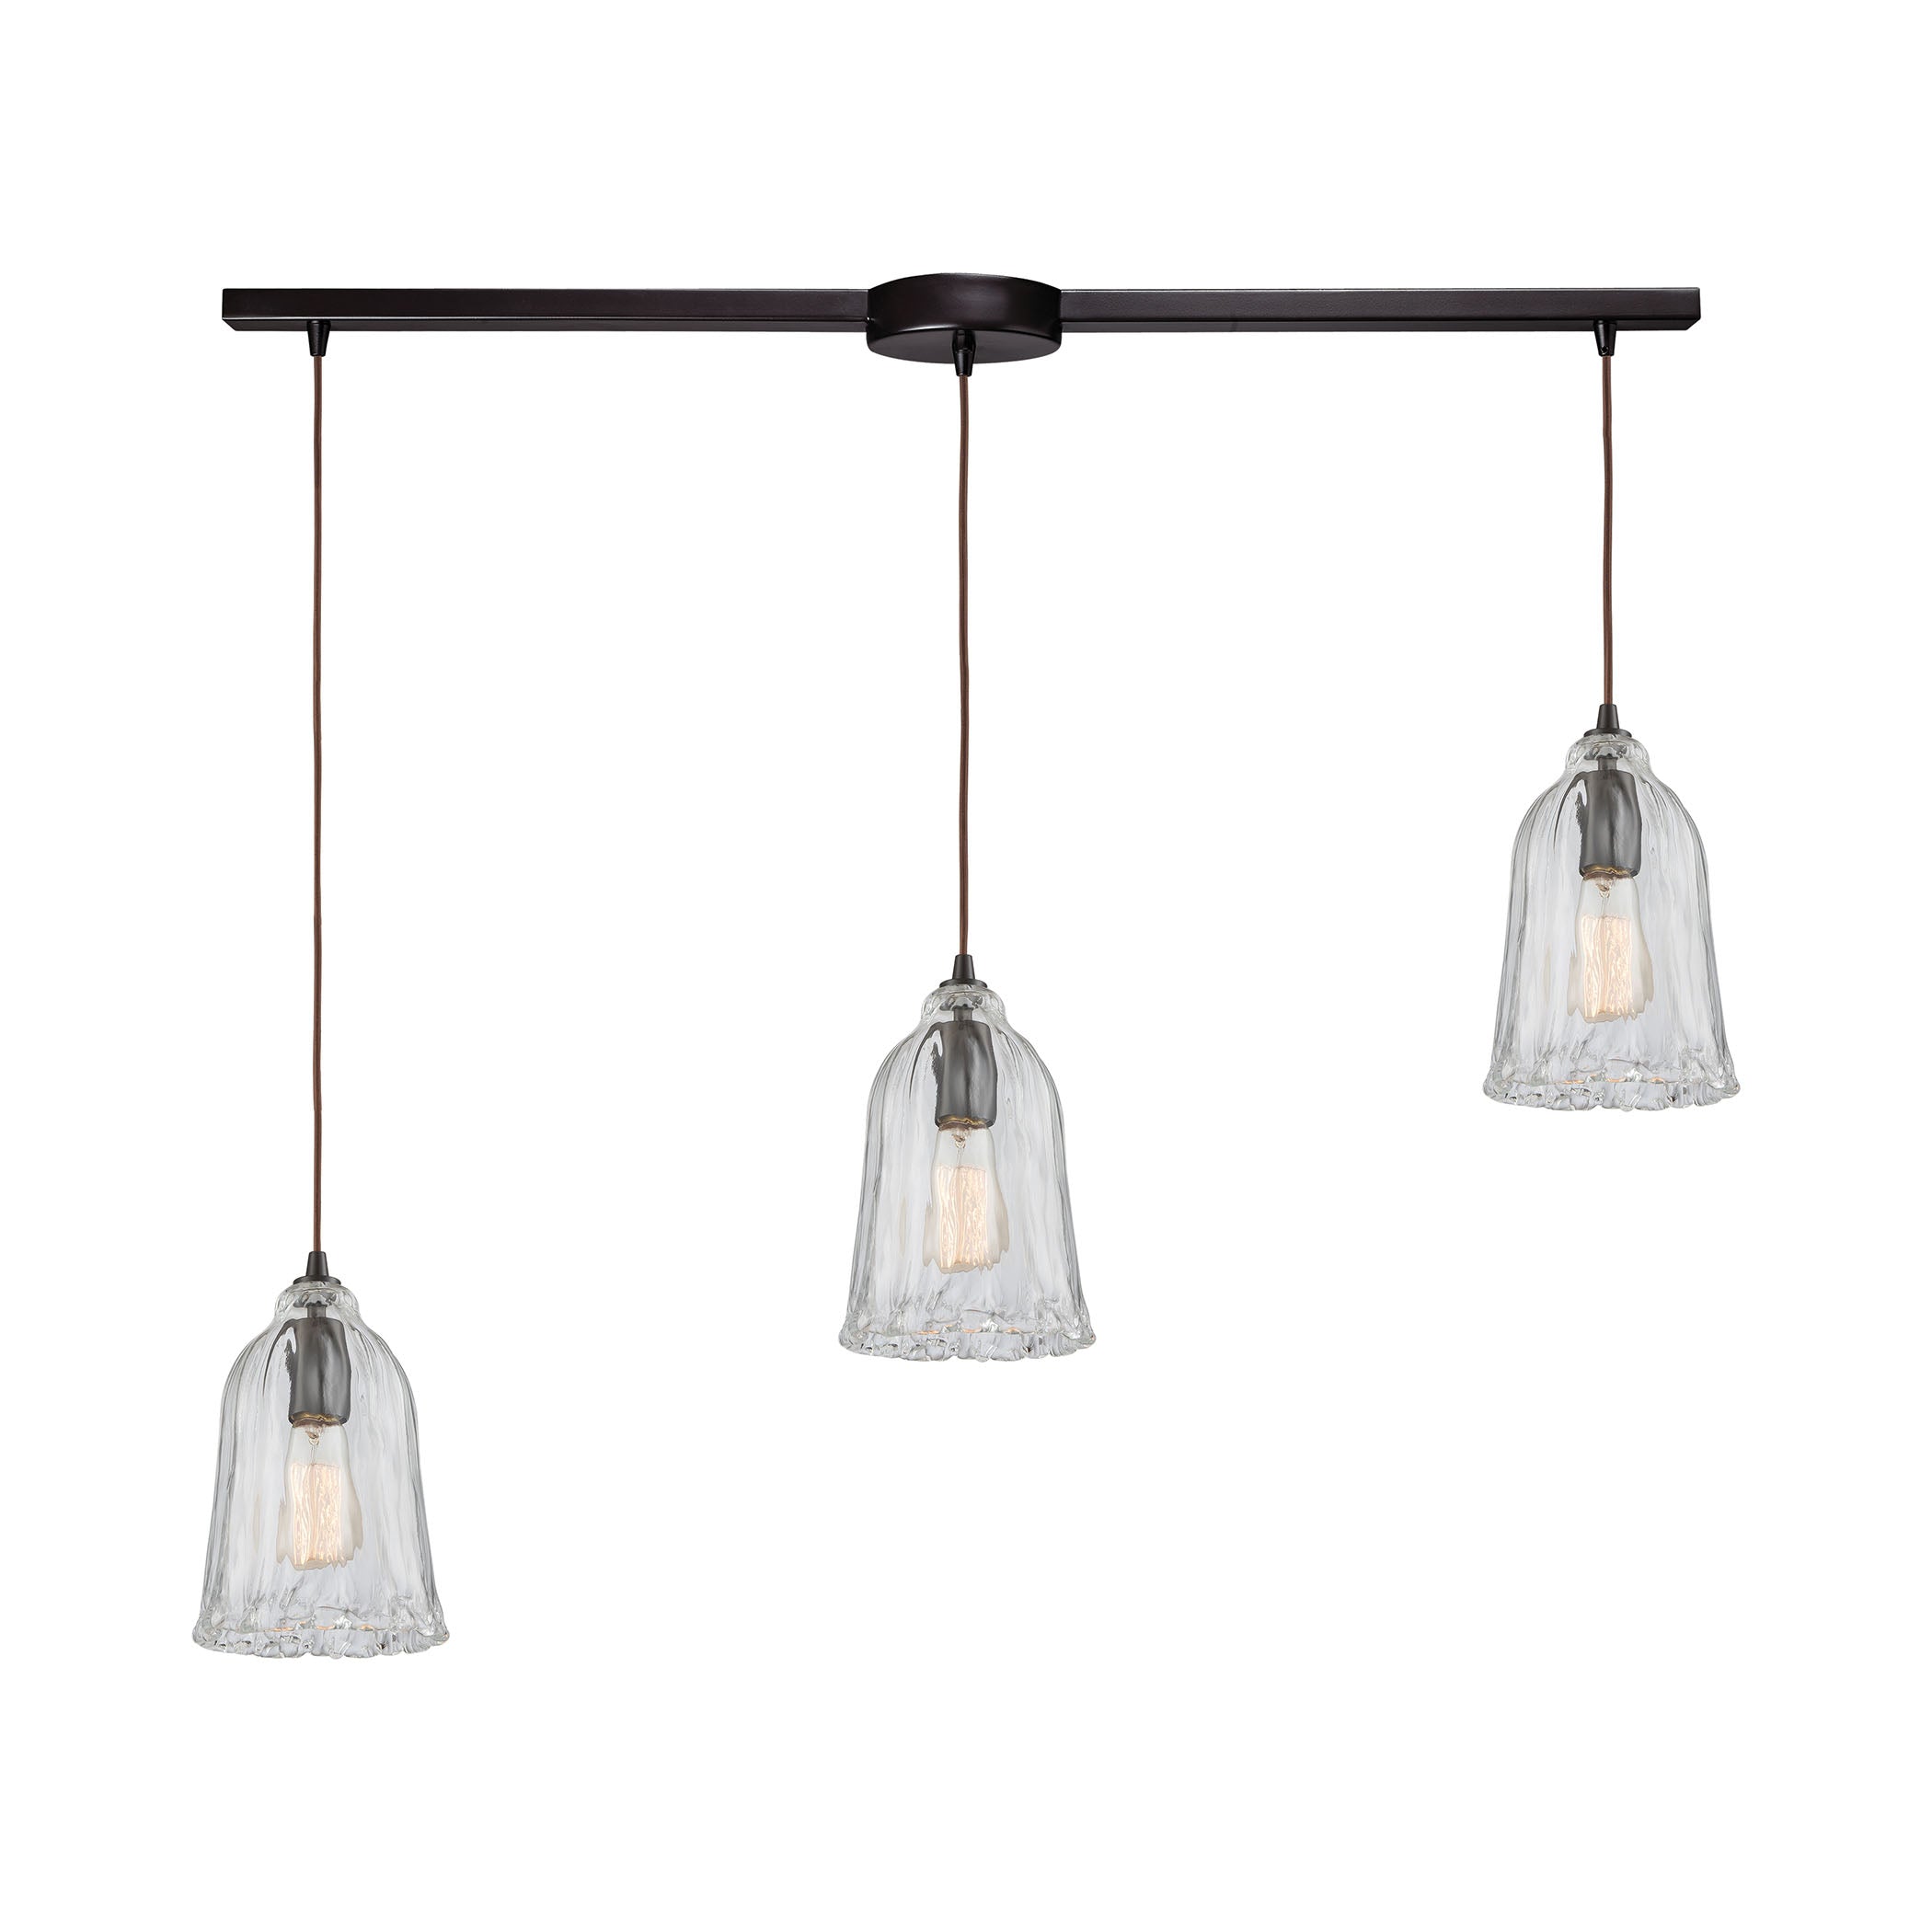 ELK Lighting 10671/3L Hand Formed Glass 3-Light Linear Mini Pendant Fixture in Oiled Bronze with Clear Hand-formed Glass